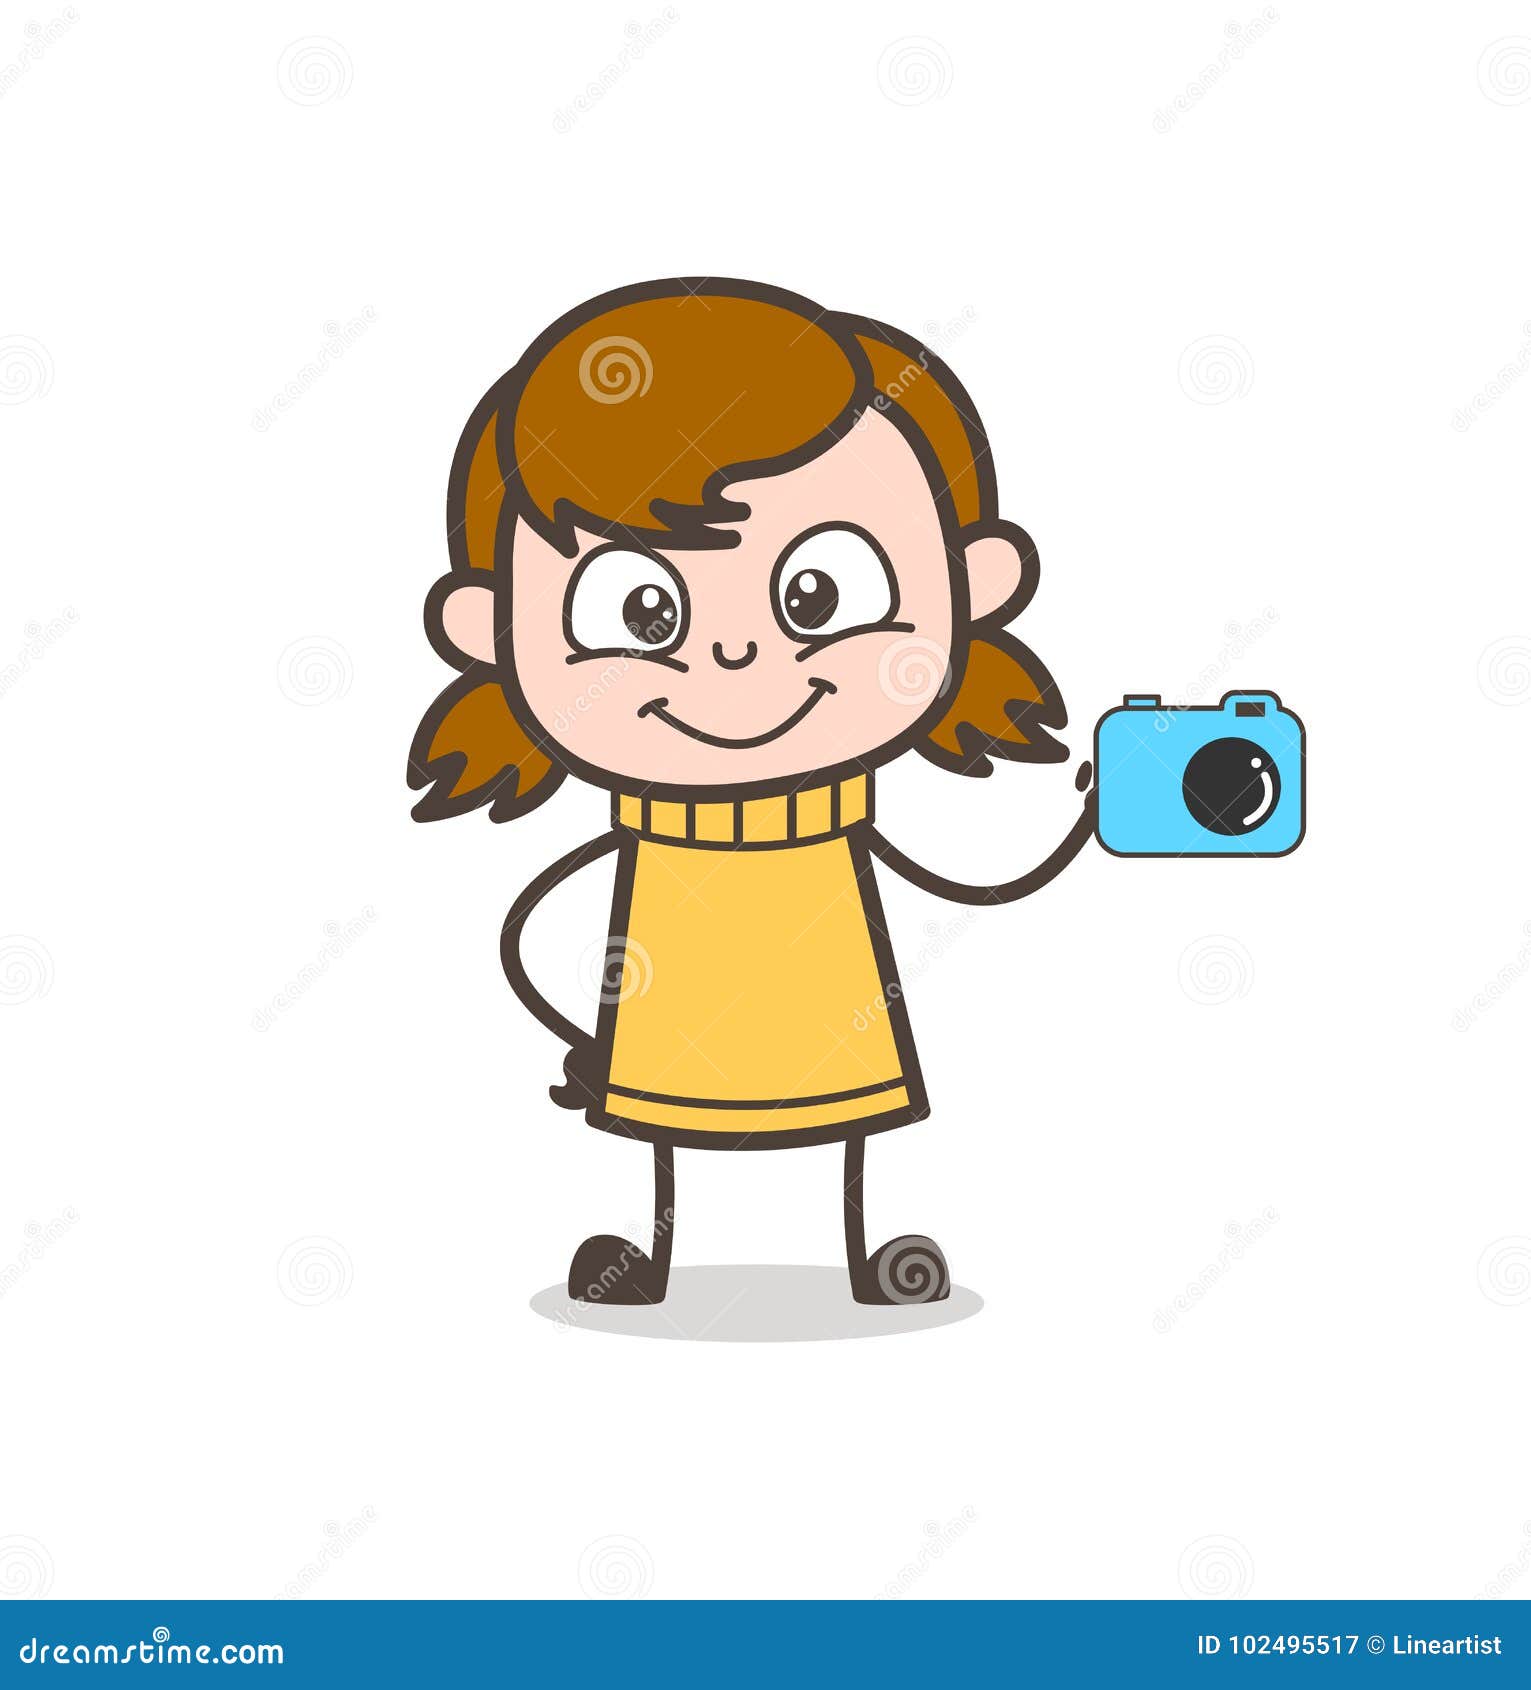 Salesgirl Cartoons, Illustrations & Vector Stock Images - 139 Pictures ...